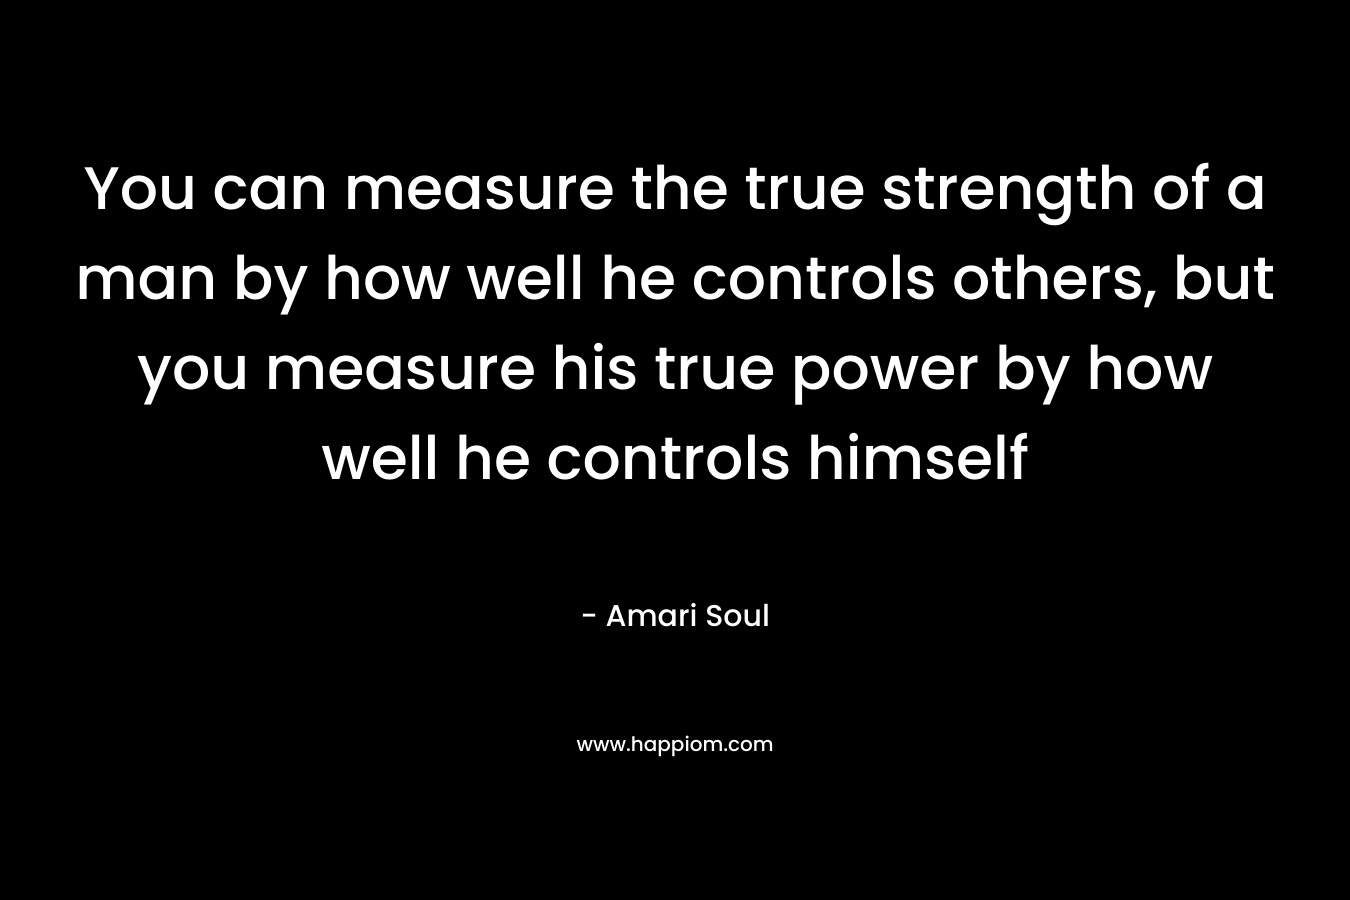 You can measure the true strength of a man by how well he controls others, but you measure his true power by how well he controls himself